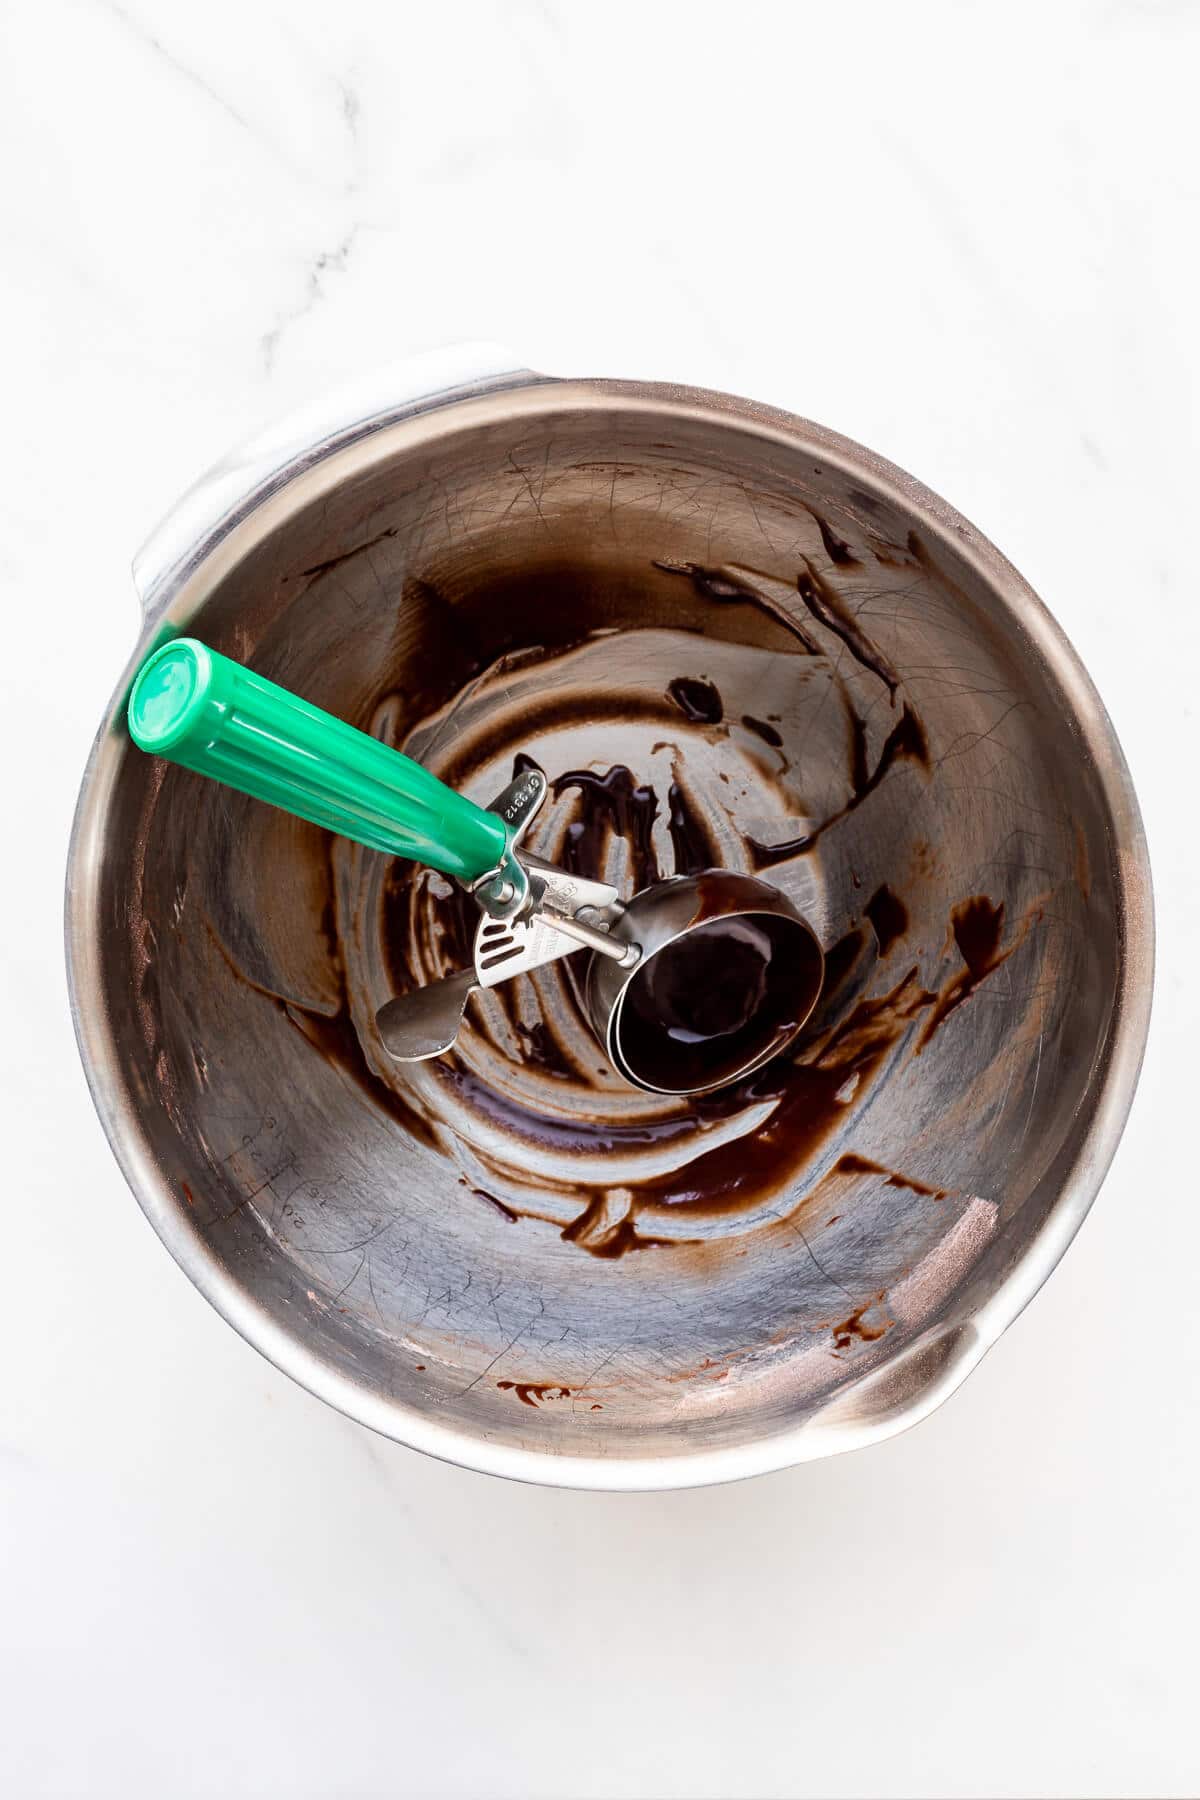 A bowl that had chocolate cake batter in it, scraped clean with a disher.